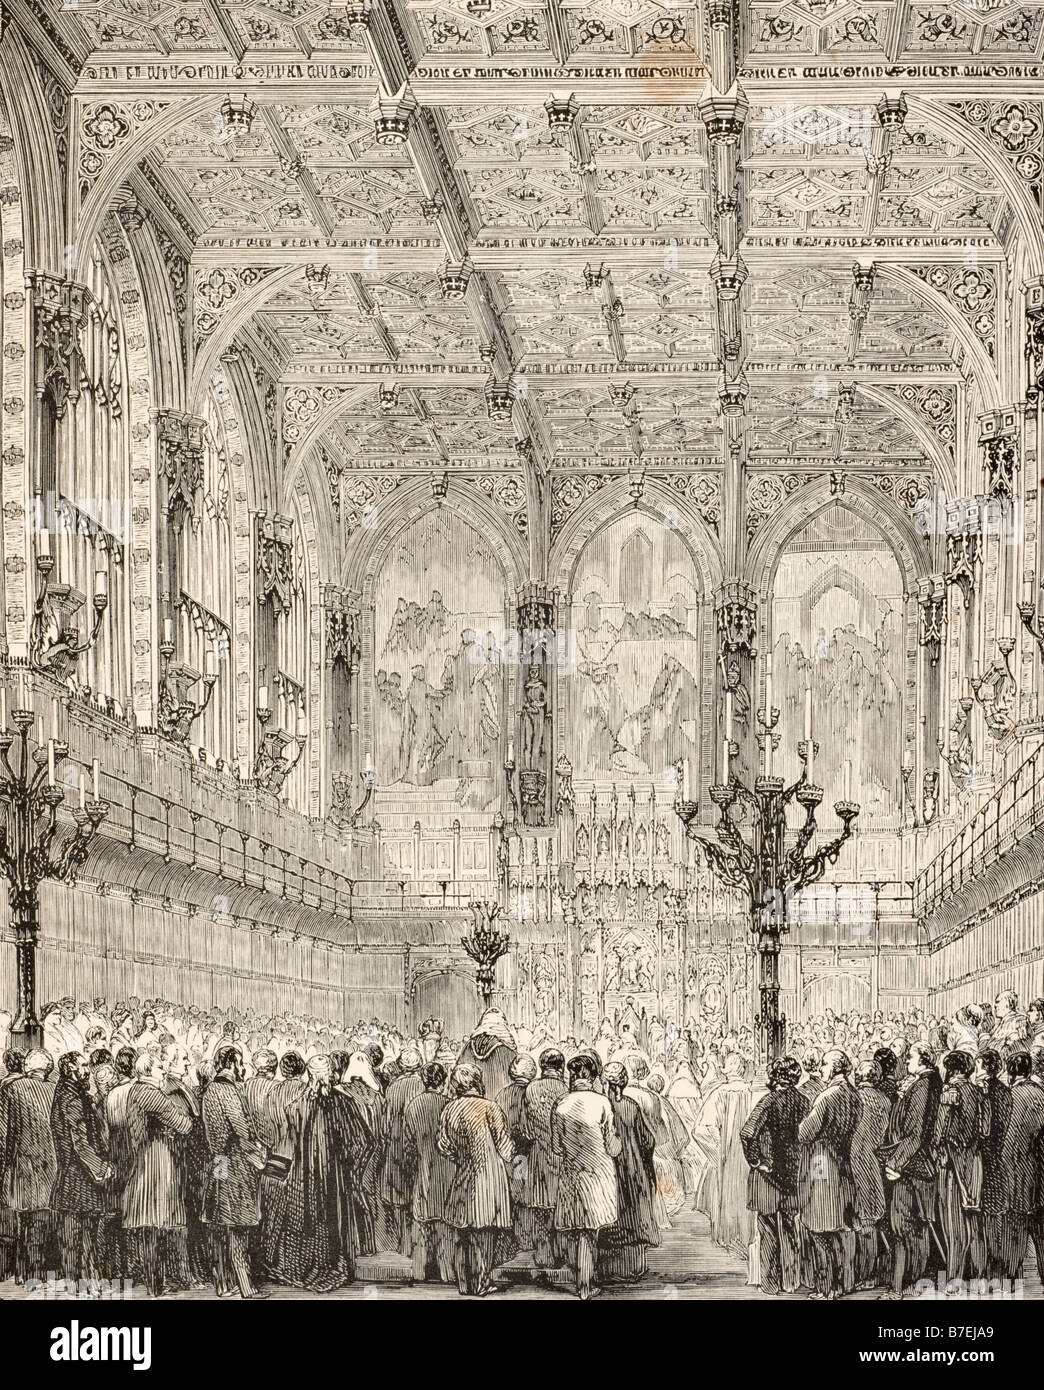 Interior of the House of Lords late 19th century London England Stock Photo